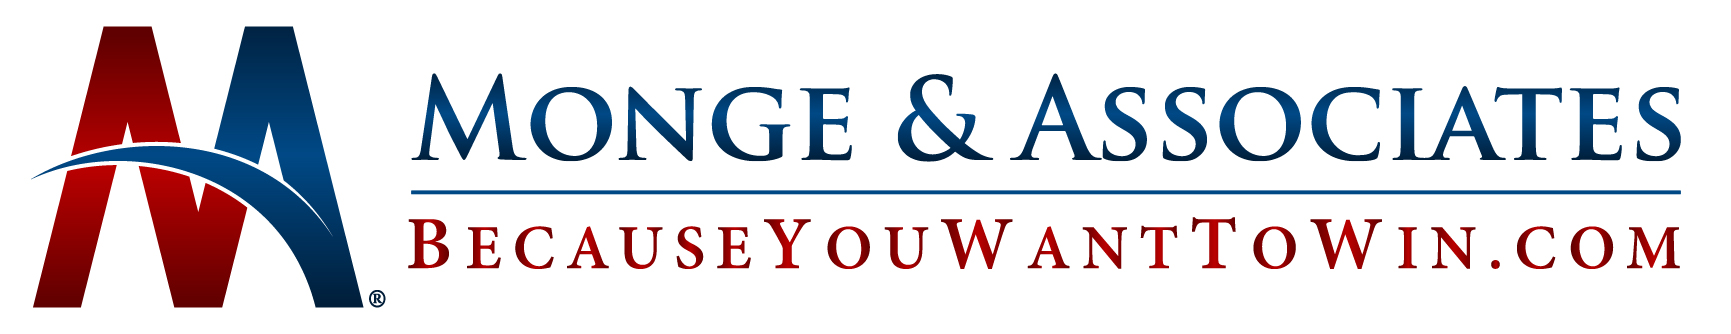 Monge & Associates, Why Choose Us?  Because You Want To Win!